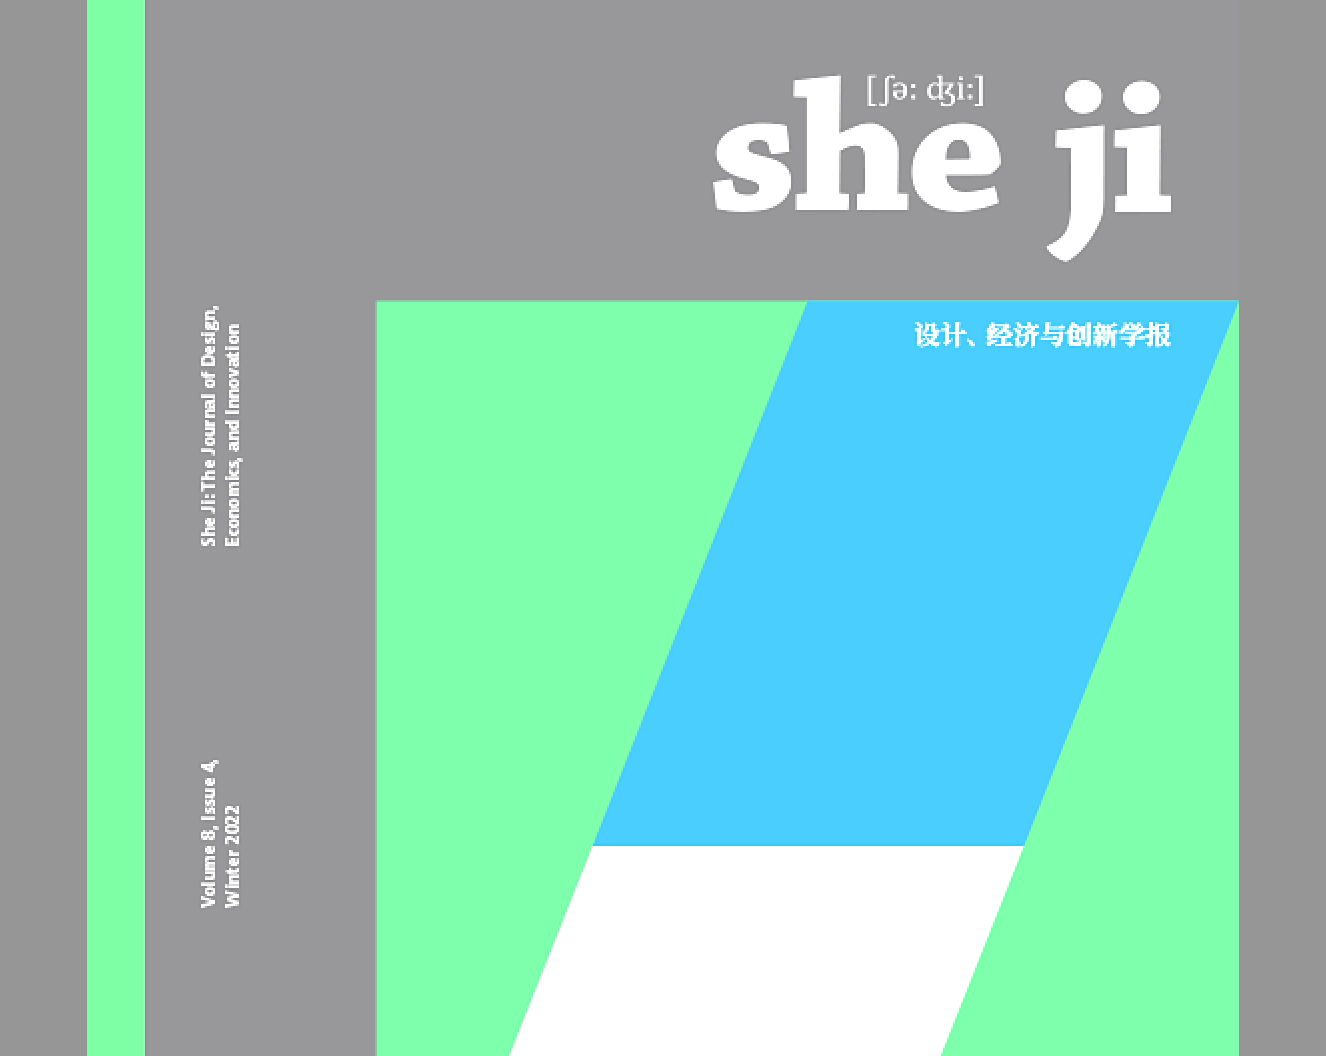 She Ji: The Journal of Design, Economics, and Innovation: Volume 8, Issue 4 (Winter 2022)